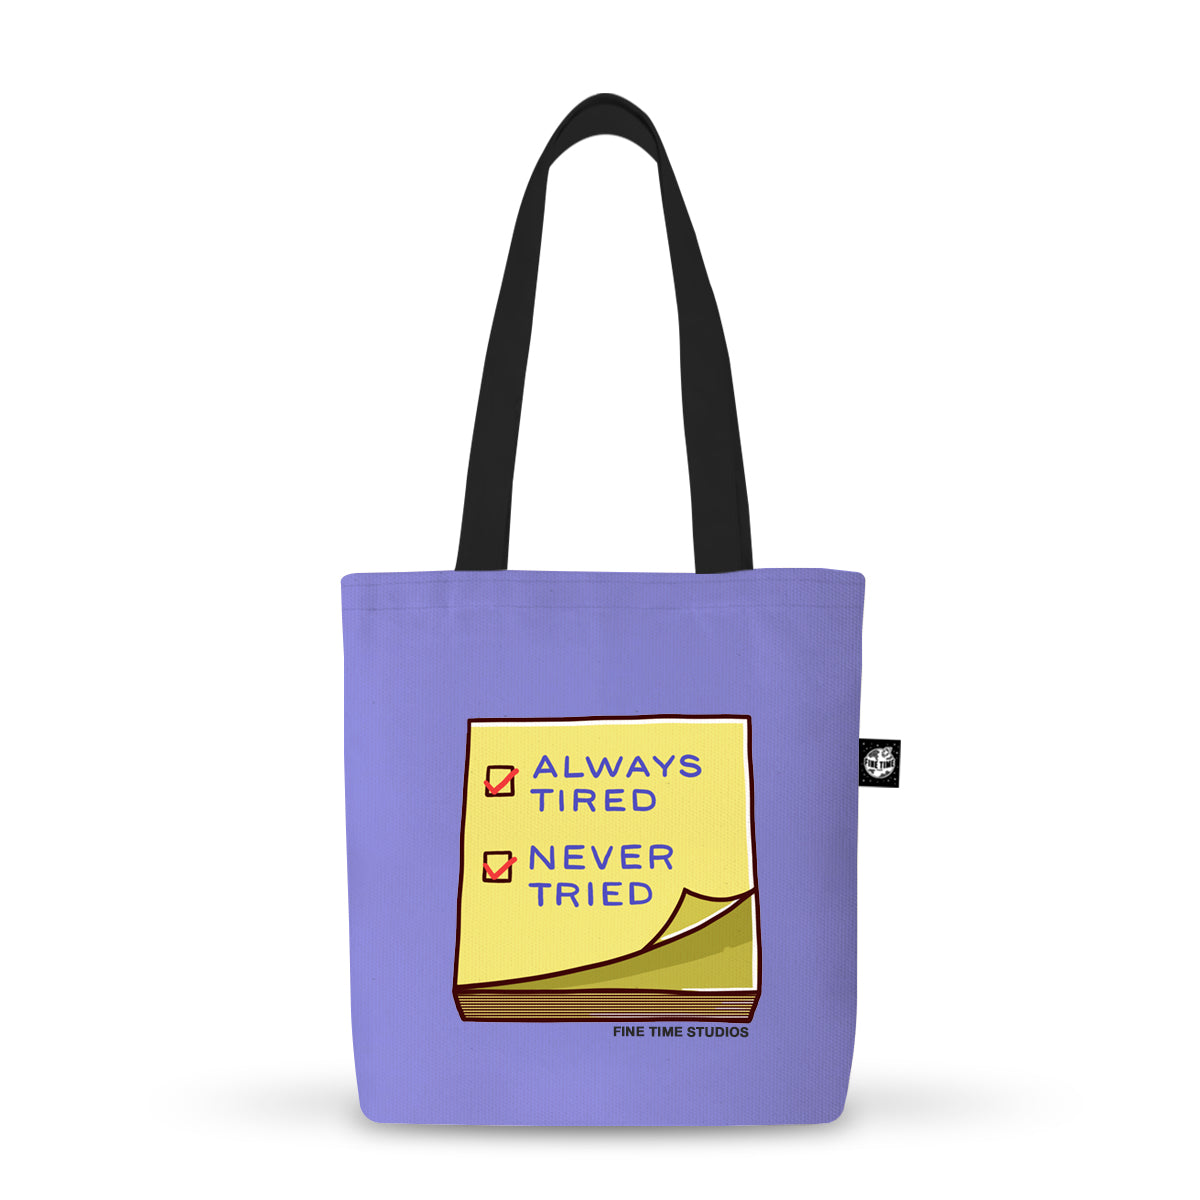 Always Tired Never Tried Tote Bag